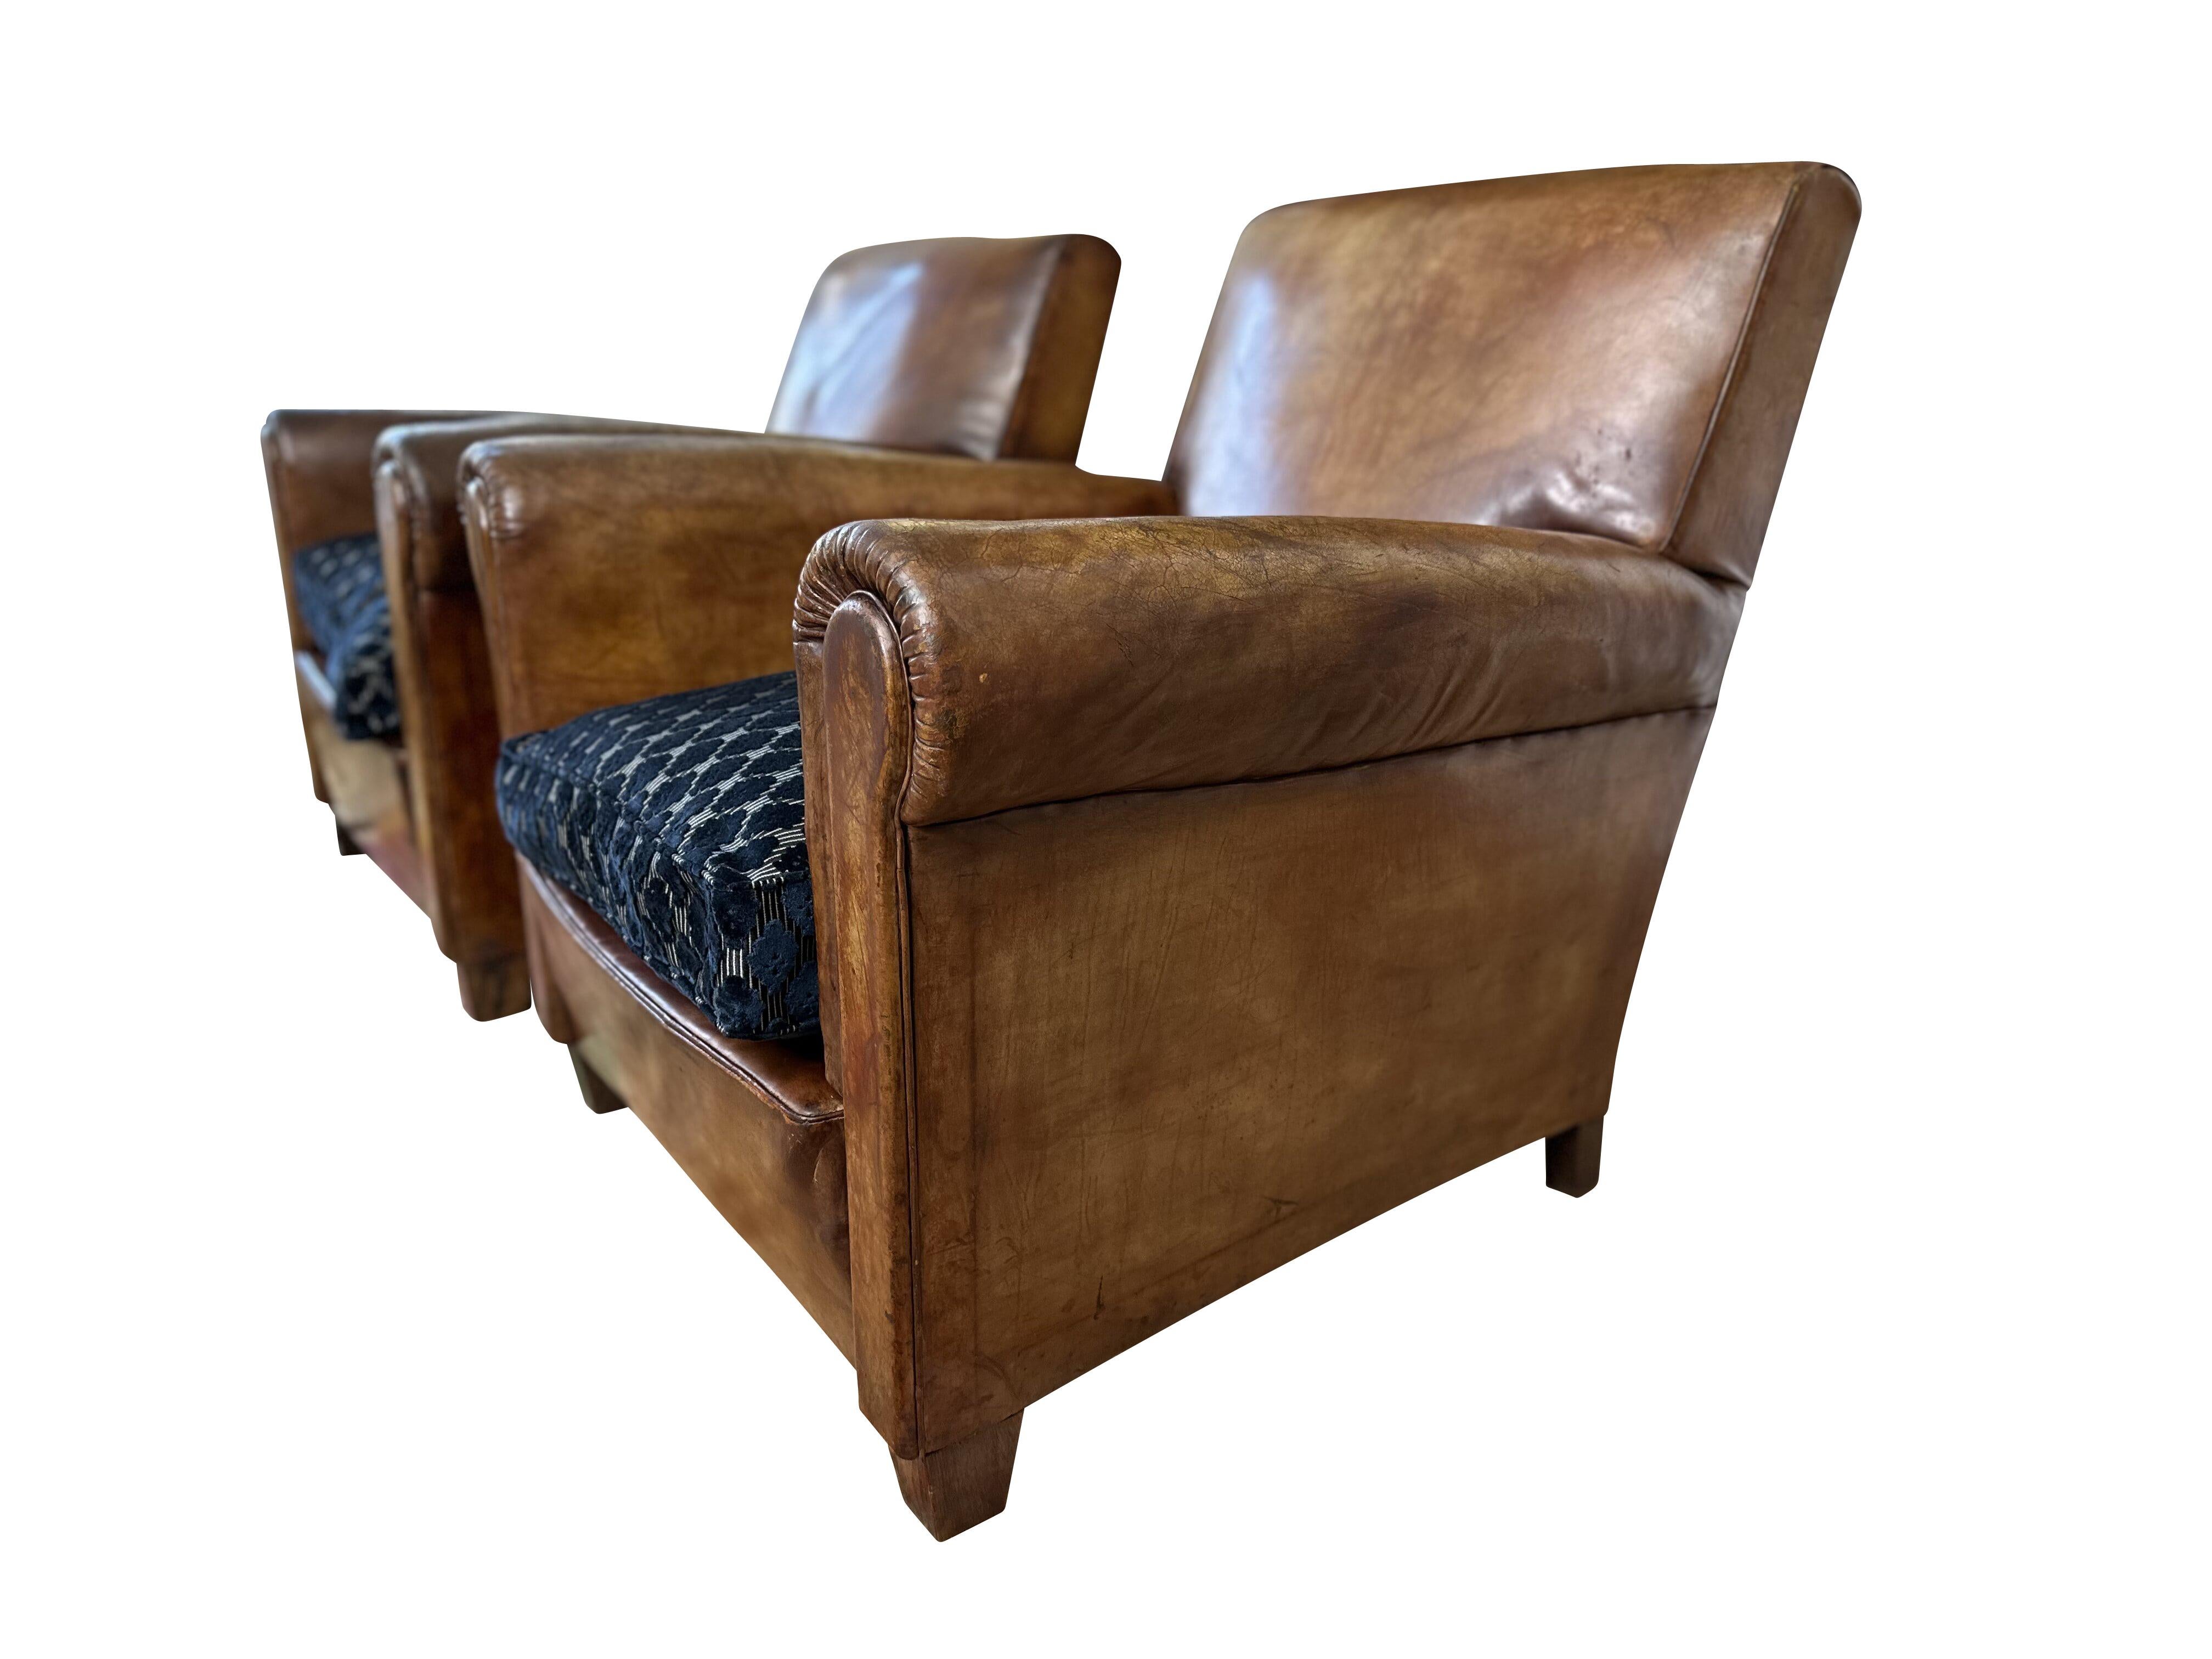 1930's Vintage Art Deco Leather Club Chairs - A Pair For Sale 4